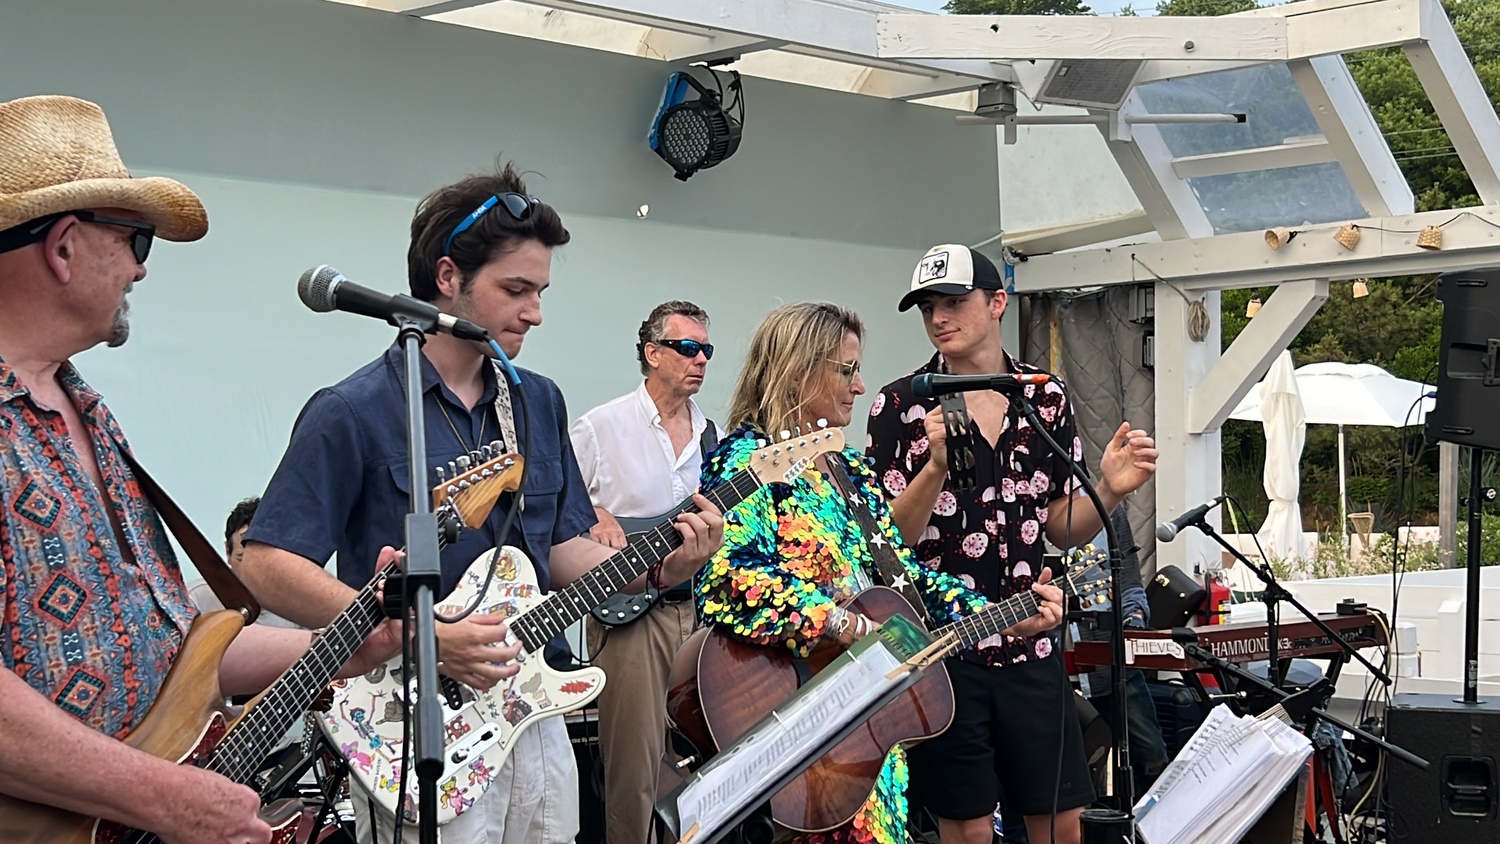 Nancy Atlas and her band on stage at The Surf Lodge in Montauk performing with her son, Cashus Muse. Both will perform at a July 22 concert in Sag Harbor. ELLEN DIOGUARDI